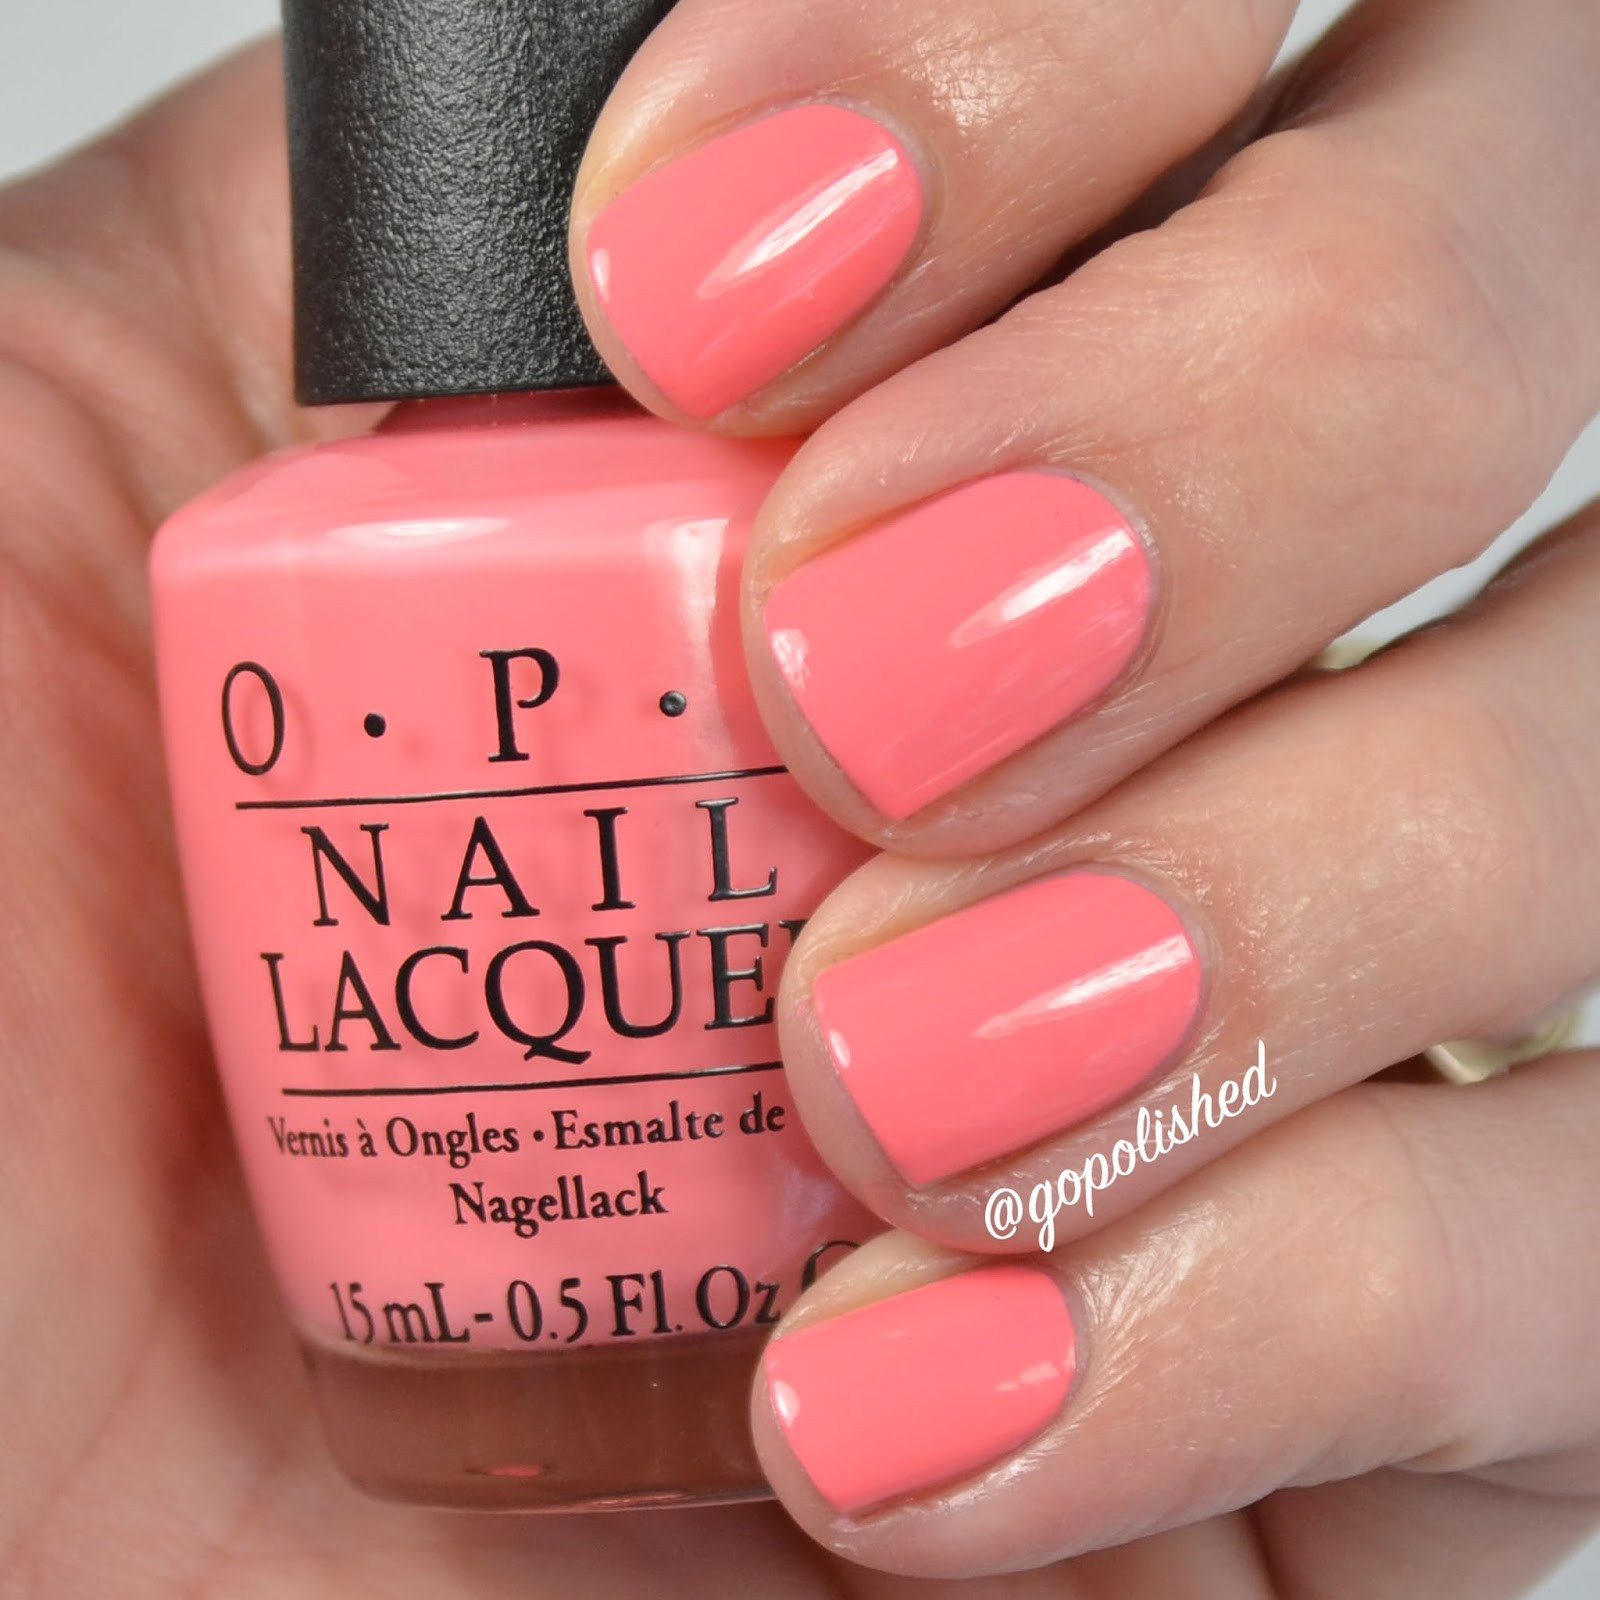 New Summer Nail Colors
 Go Polished OPI New Orlean parisons